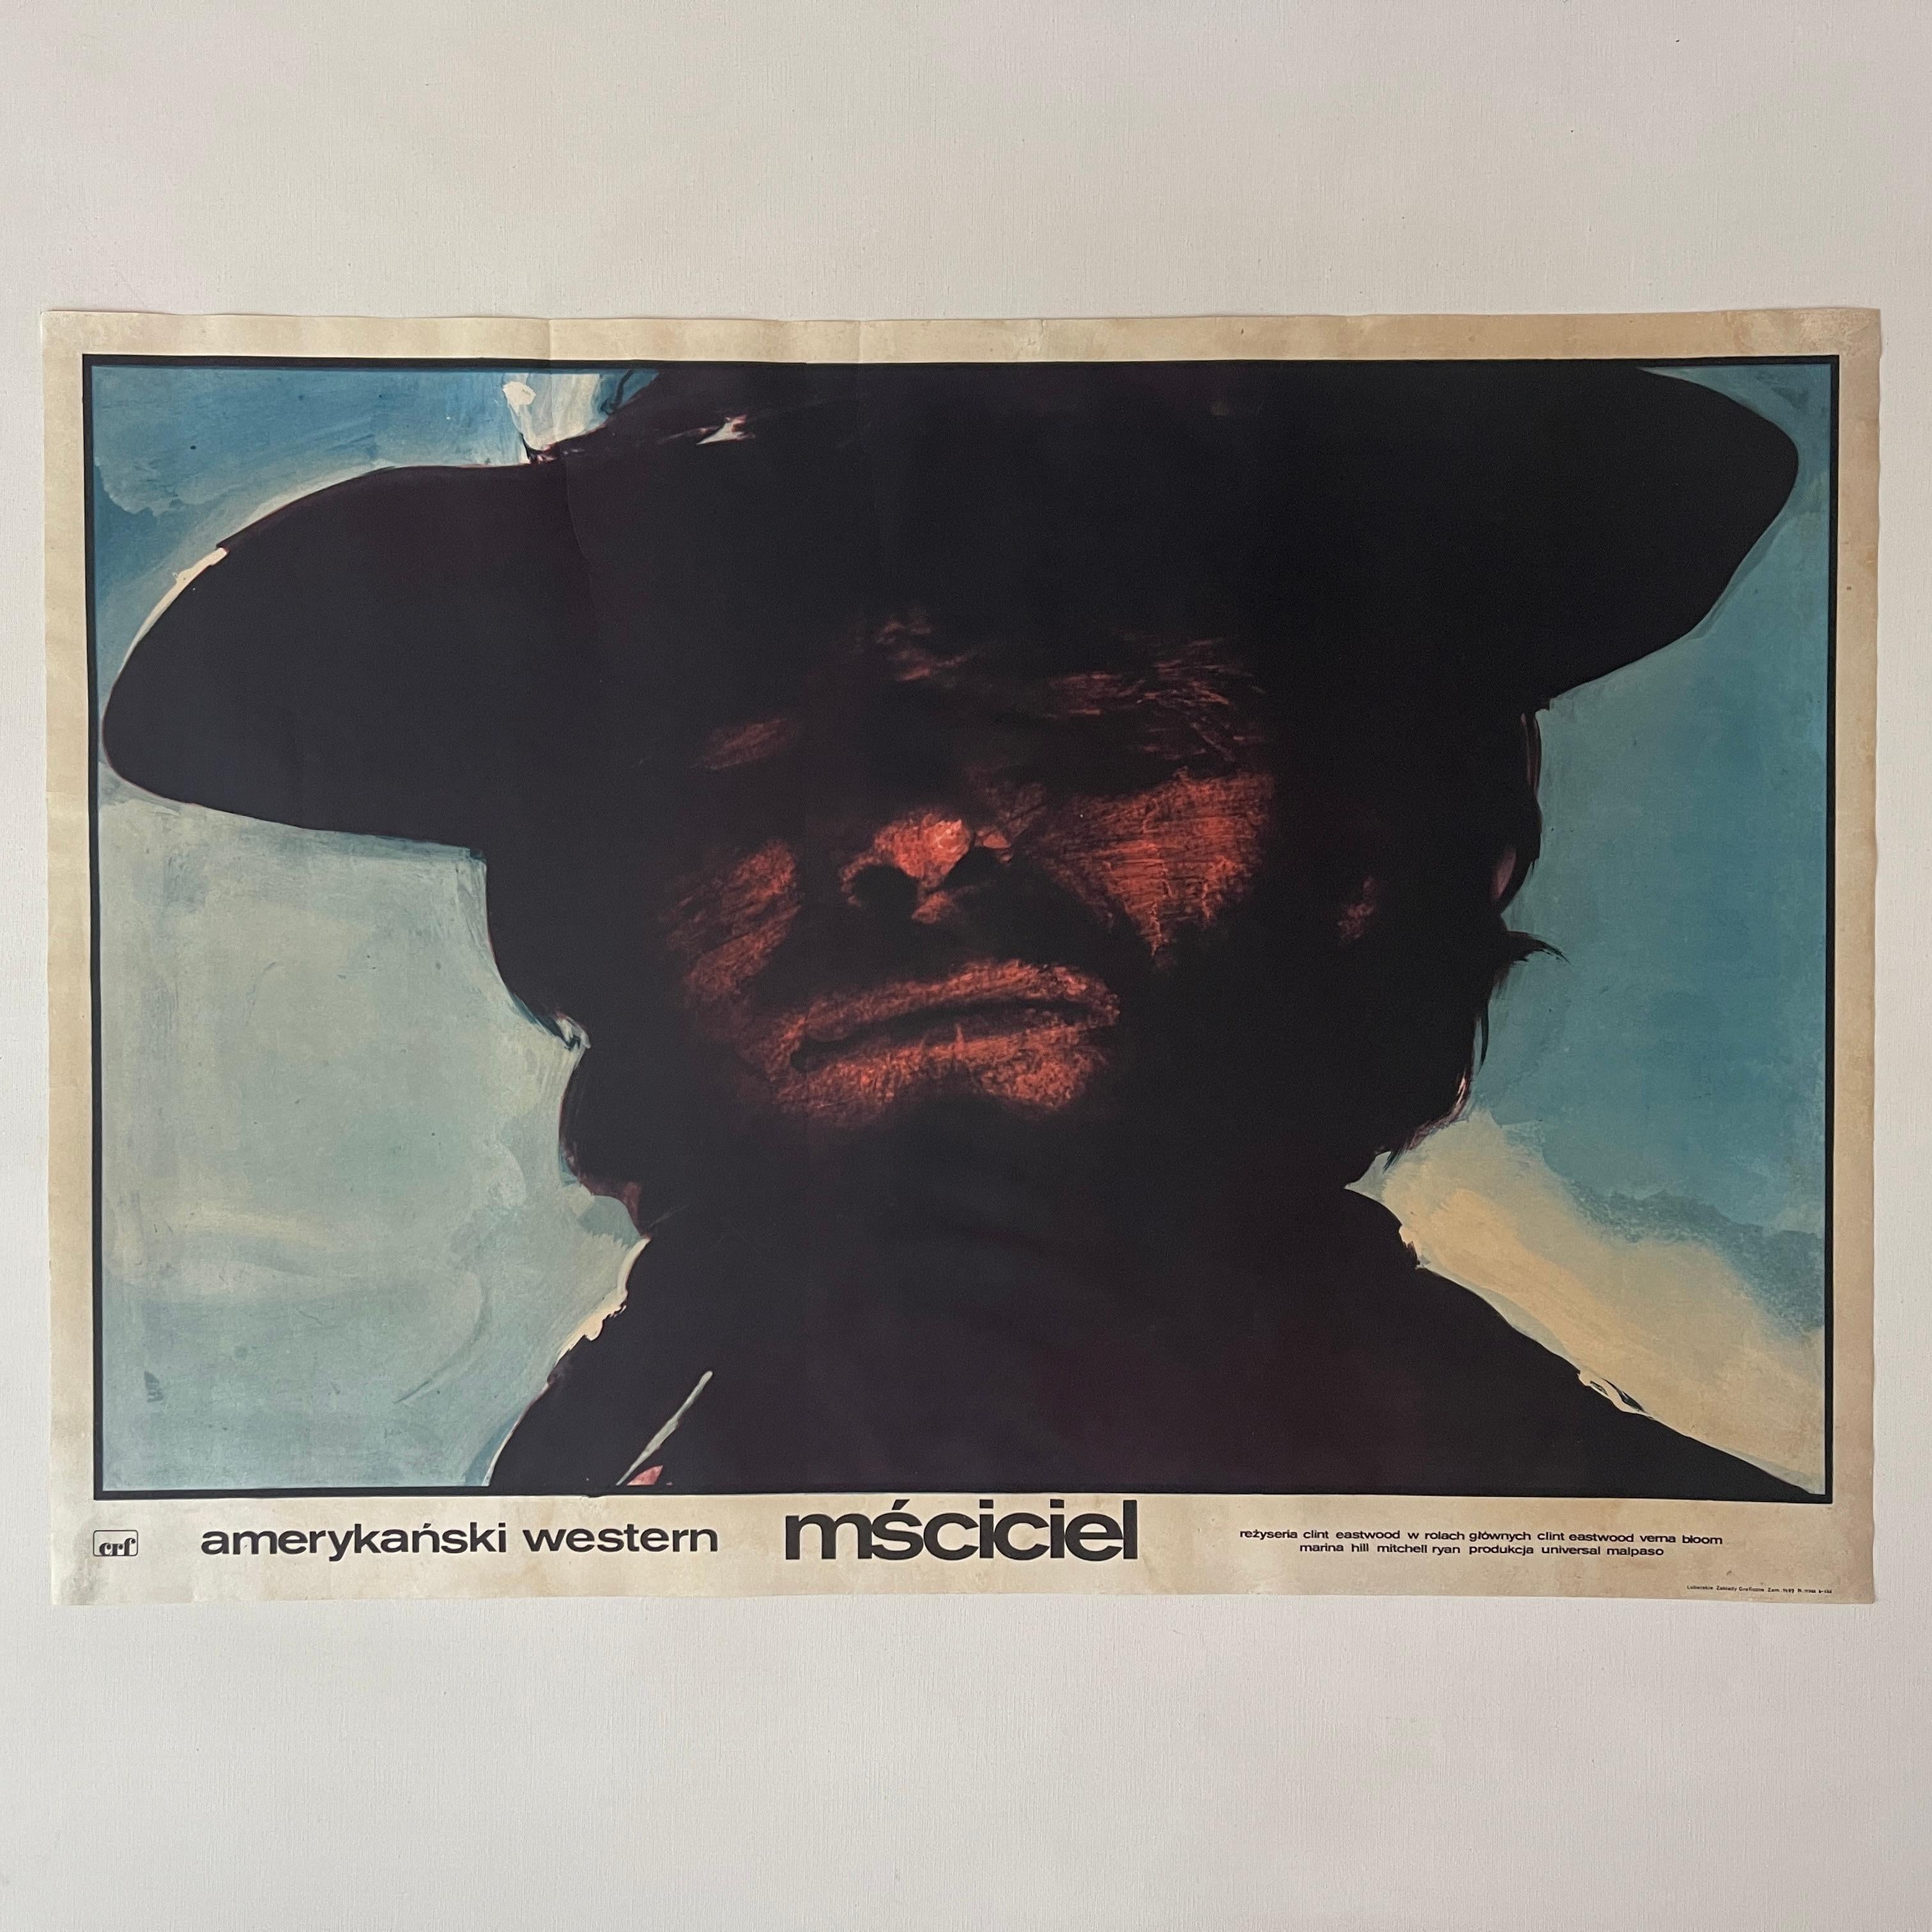 This is a fabulous rare and sought after Polish poster designed from 1975 by Marek Freudenreich for the US movie ‘High Plains Drifter’ (Msciciel) starring Clint Eastwood.

Polish A1 size: 83.5 x 59 cm

Condition: The poster is in good condition,